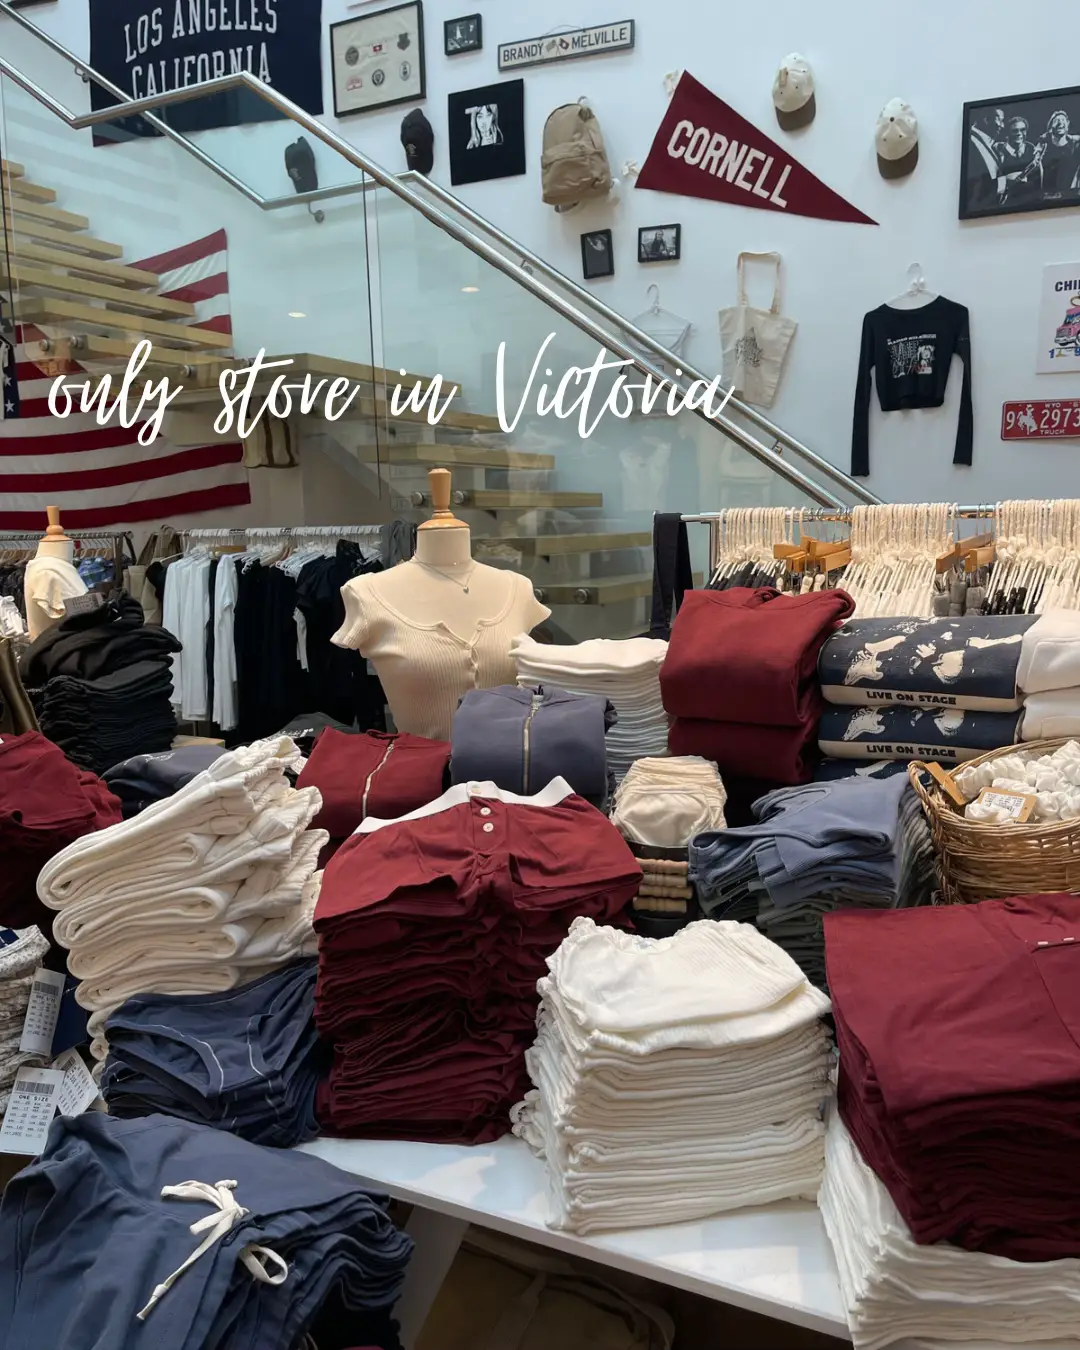 Melbourne's only Brandy Melville store !! 🧸✨, Gallery posted by  𝒋𝒆𝒘𝒆𝒍 𐀔•*。